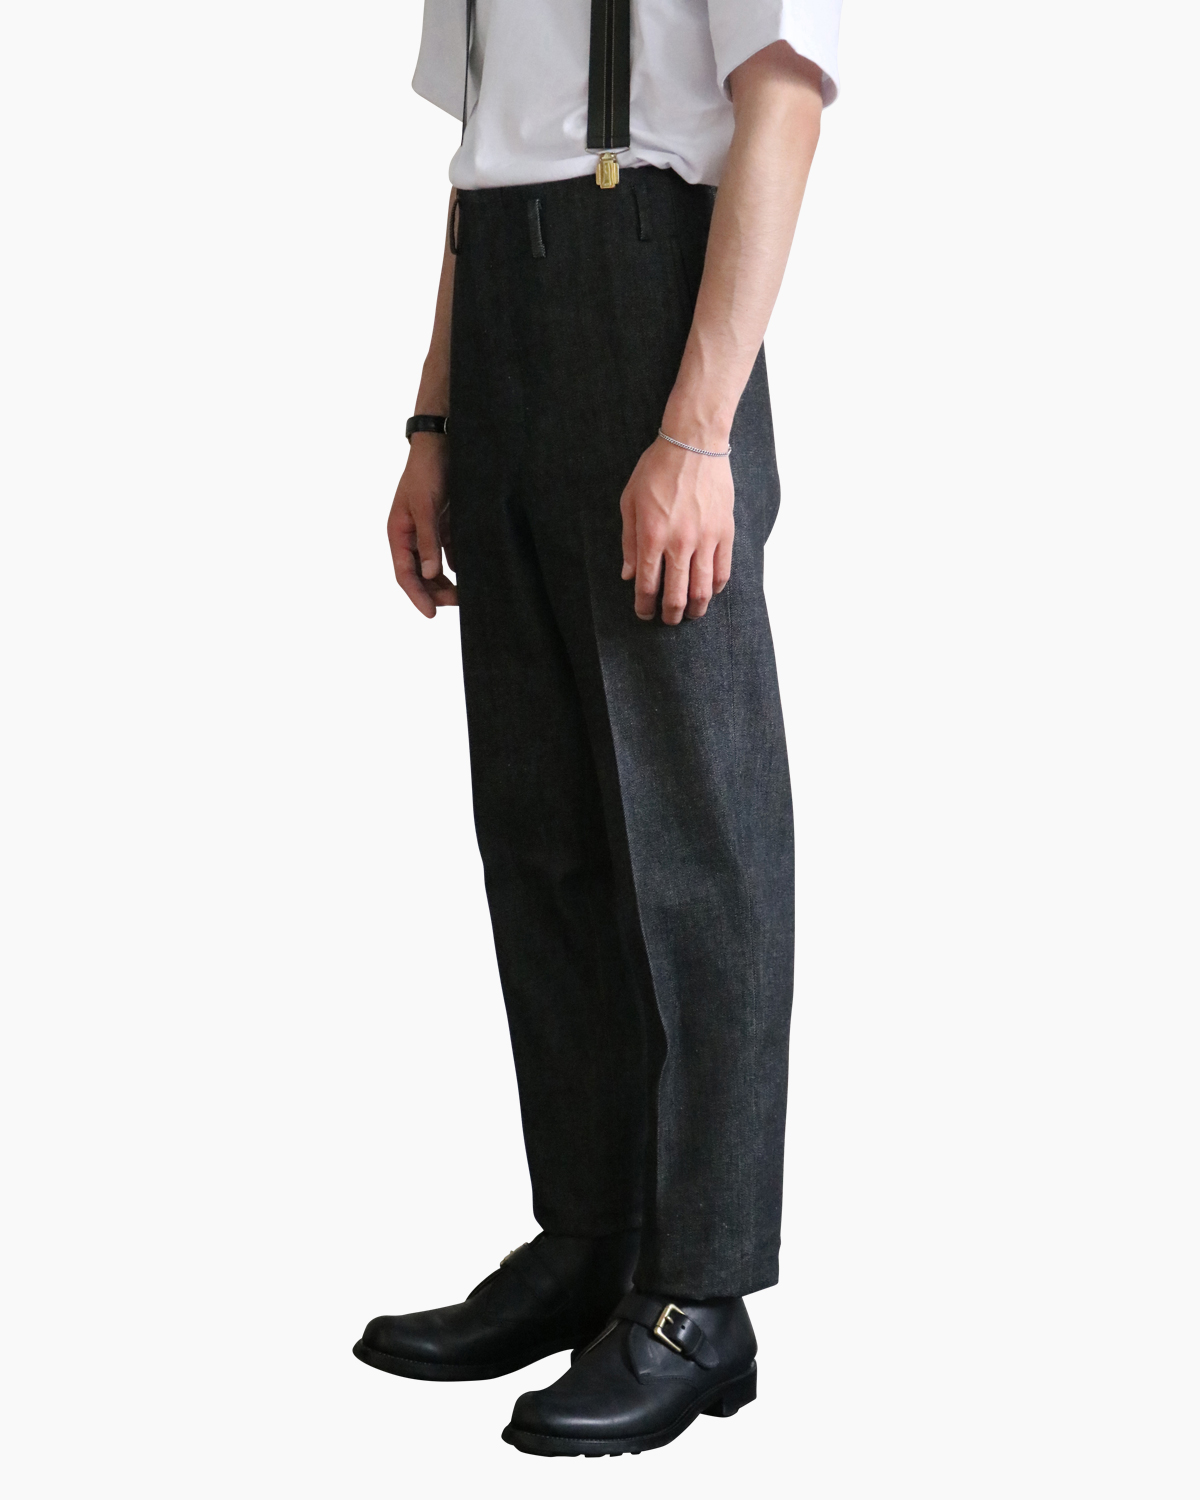 NEAT for Continuer Extra Space｜CONE DENIM｜TOPIC｜Continuer  Inc.｜メガネ・サングラス｜Select Shop